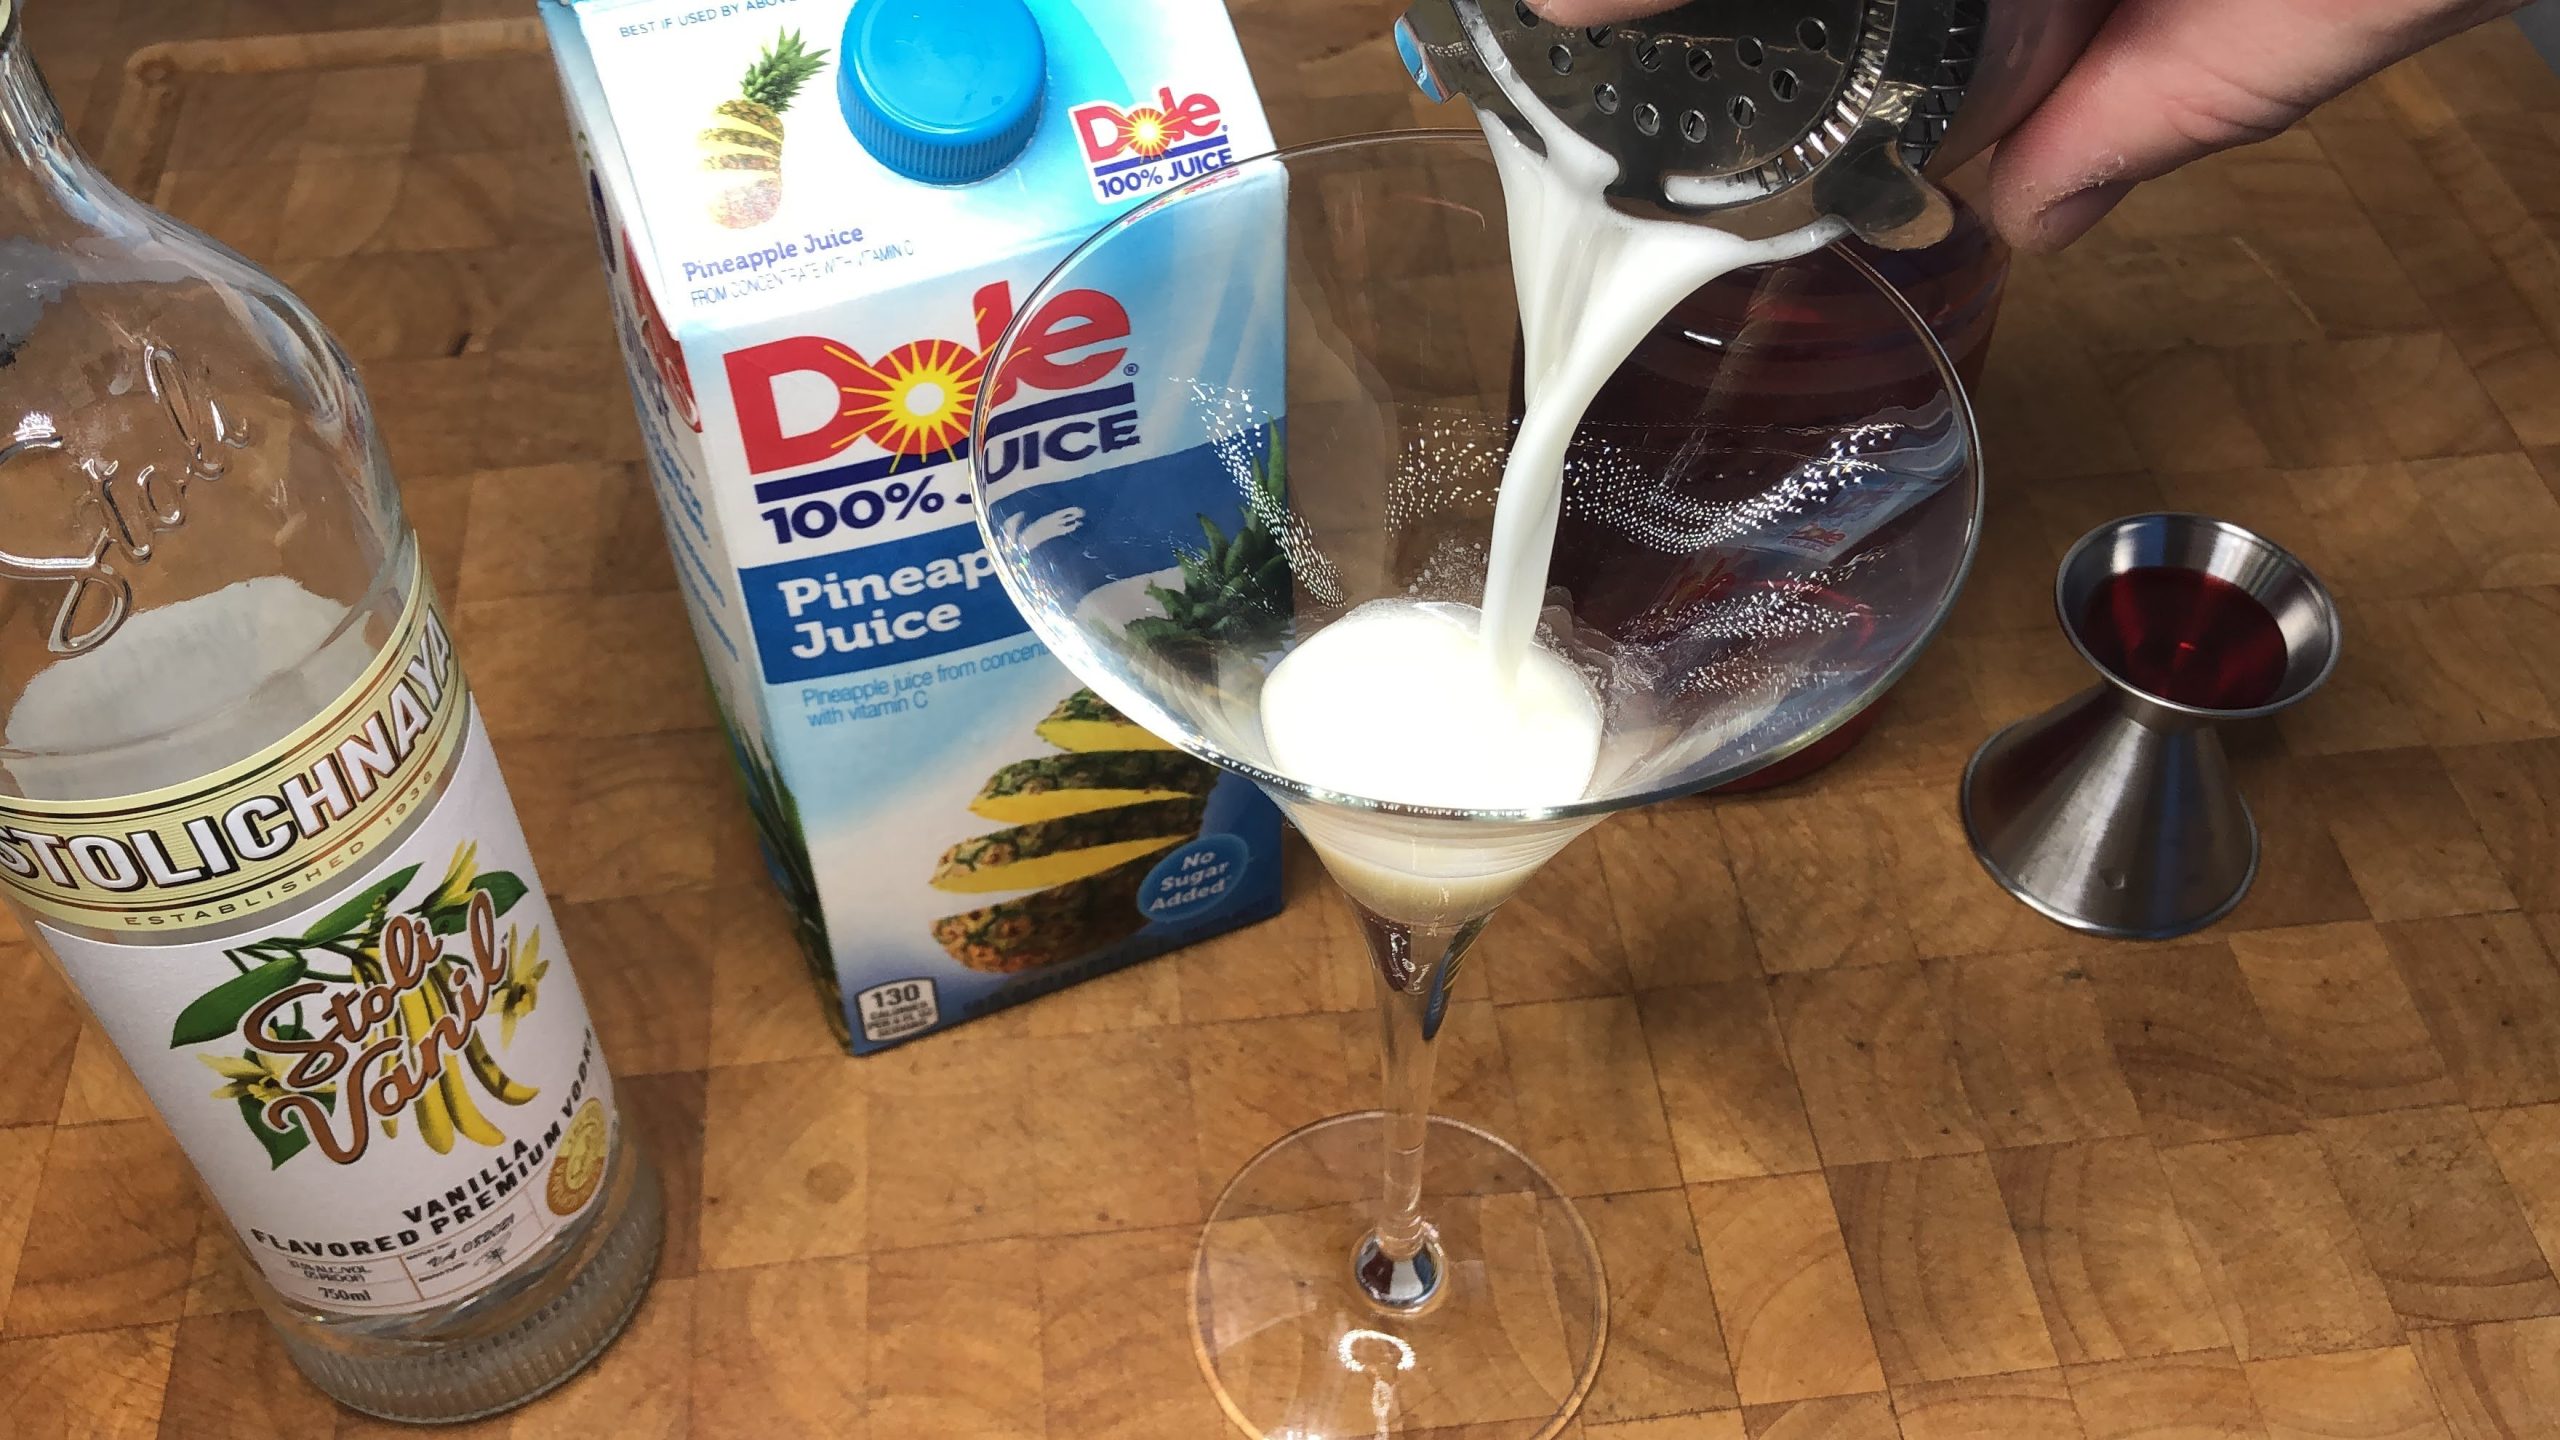 pouring pineapple upside down cake martini into glass